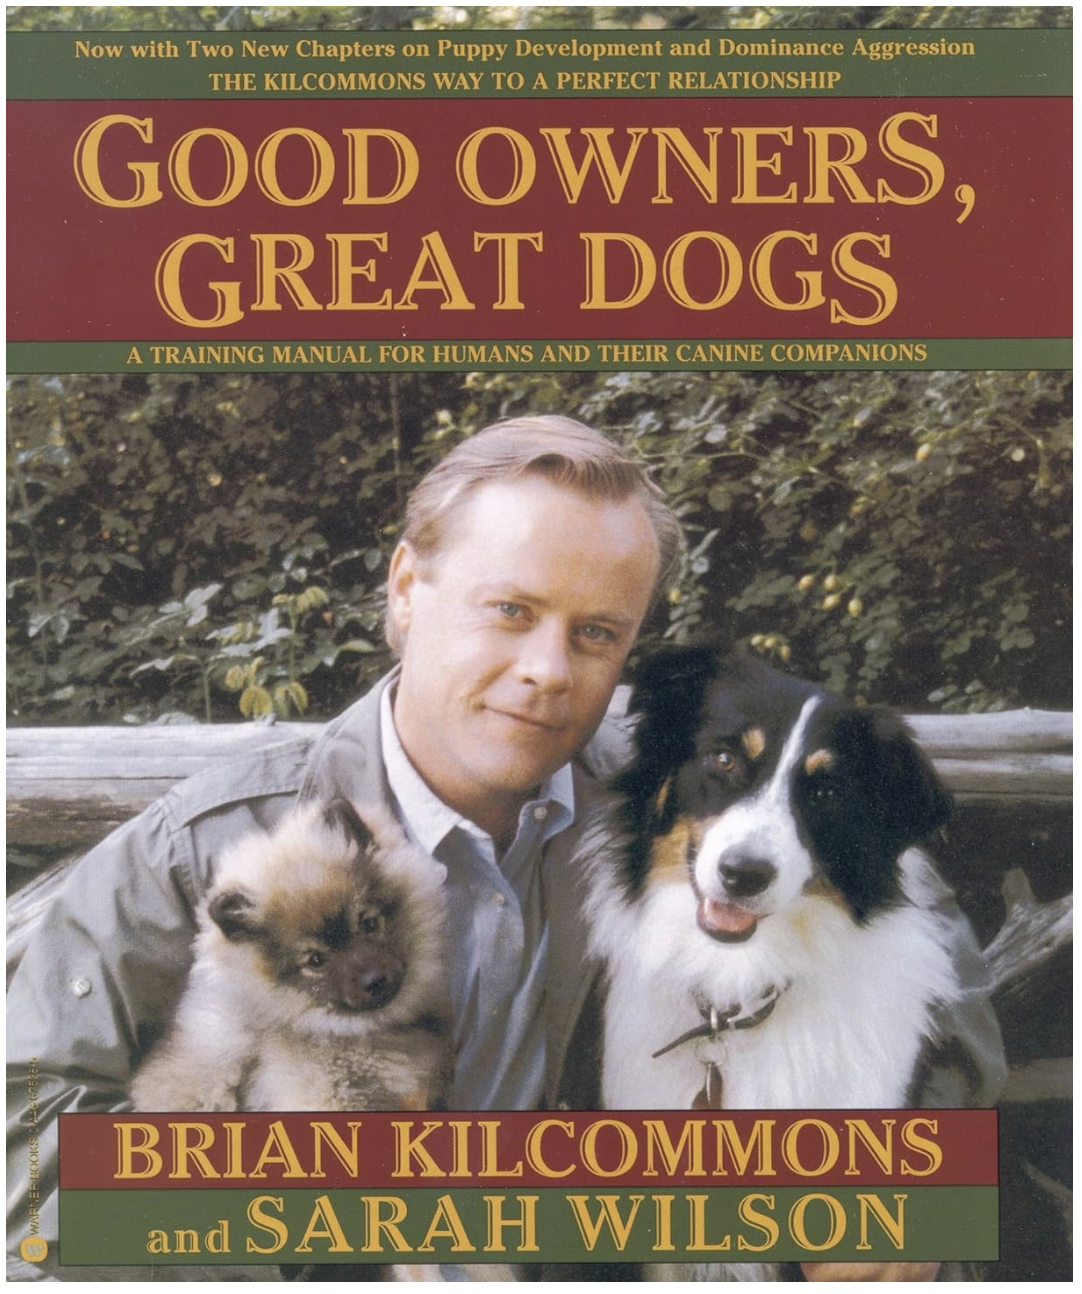 Good Owners, Great Dogs book cover